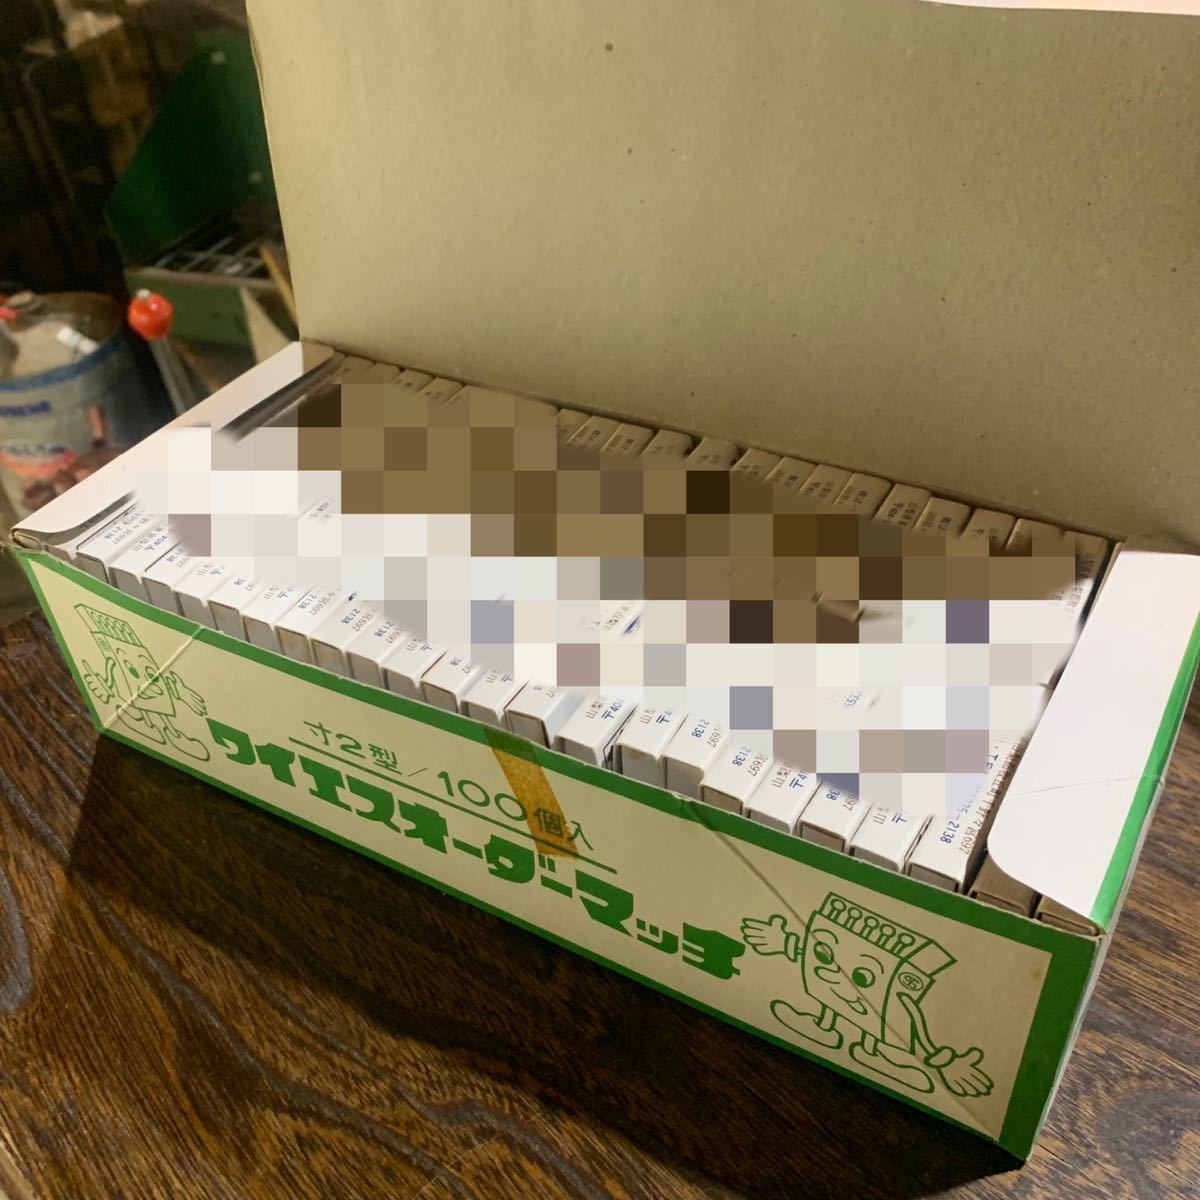 [23040201HT] Showa Retro / Match / long-term keeping goods / one box 100 piece insertion. box,25 boxed. large box 1 box / unused goods / long-term storage middle in case of. some stains, dirt equipped / present condition delivery 